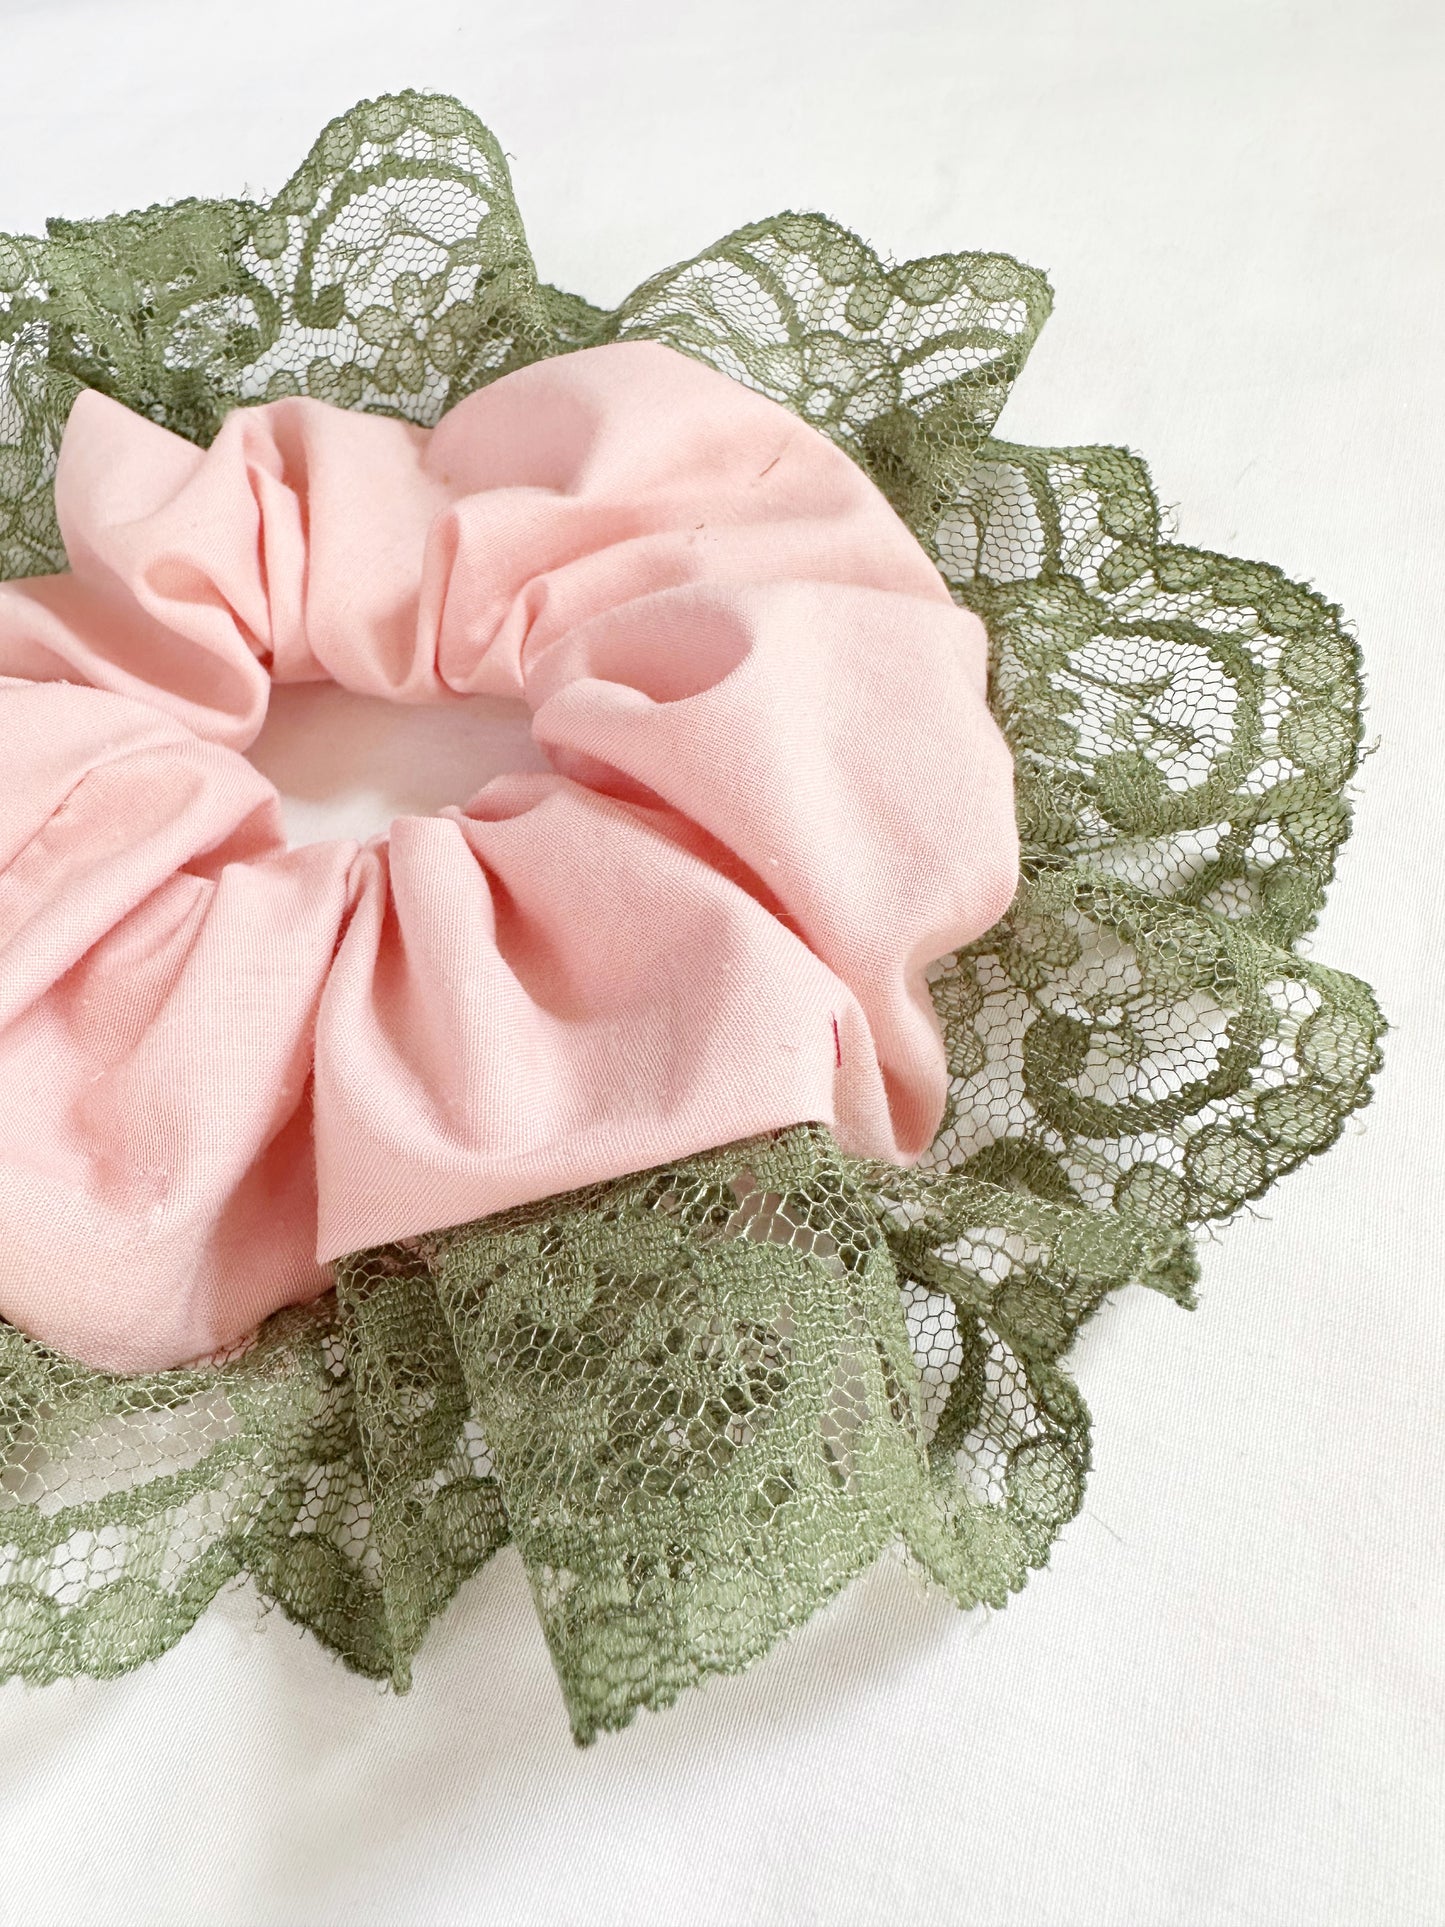 Oversized scrunchie in pink and green lace